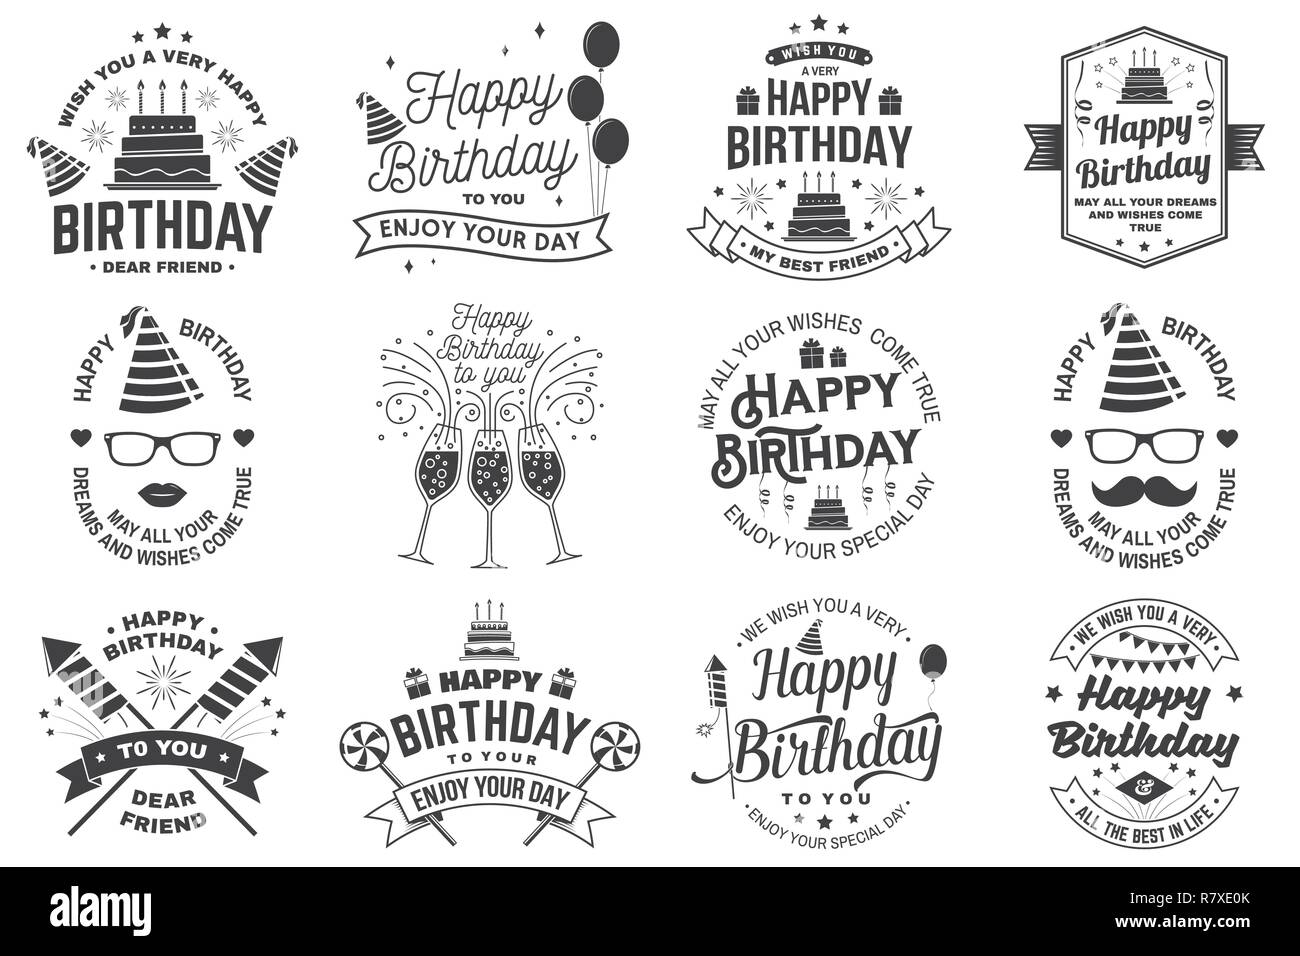 Set of Happy Birthday templates for overlay, badge, sticker, card with bunch of balloons, gifts, firework rockets and birthday cake with candles. Vector. Vintage design for birthday celebration Stock Vector